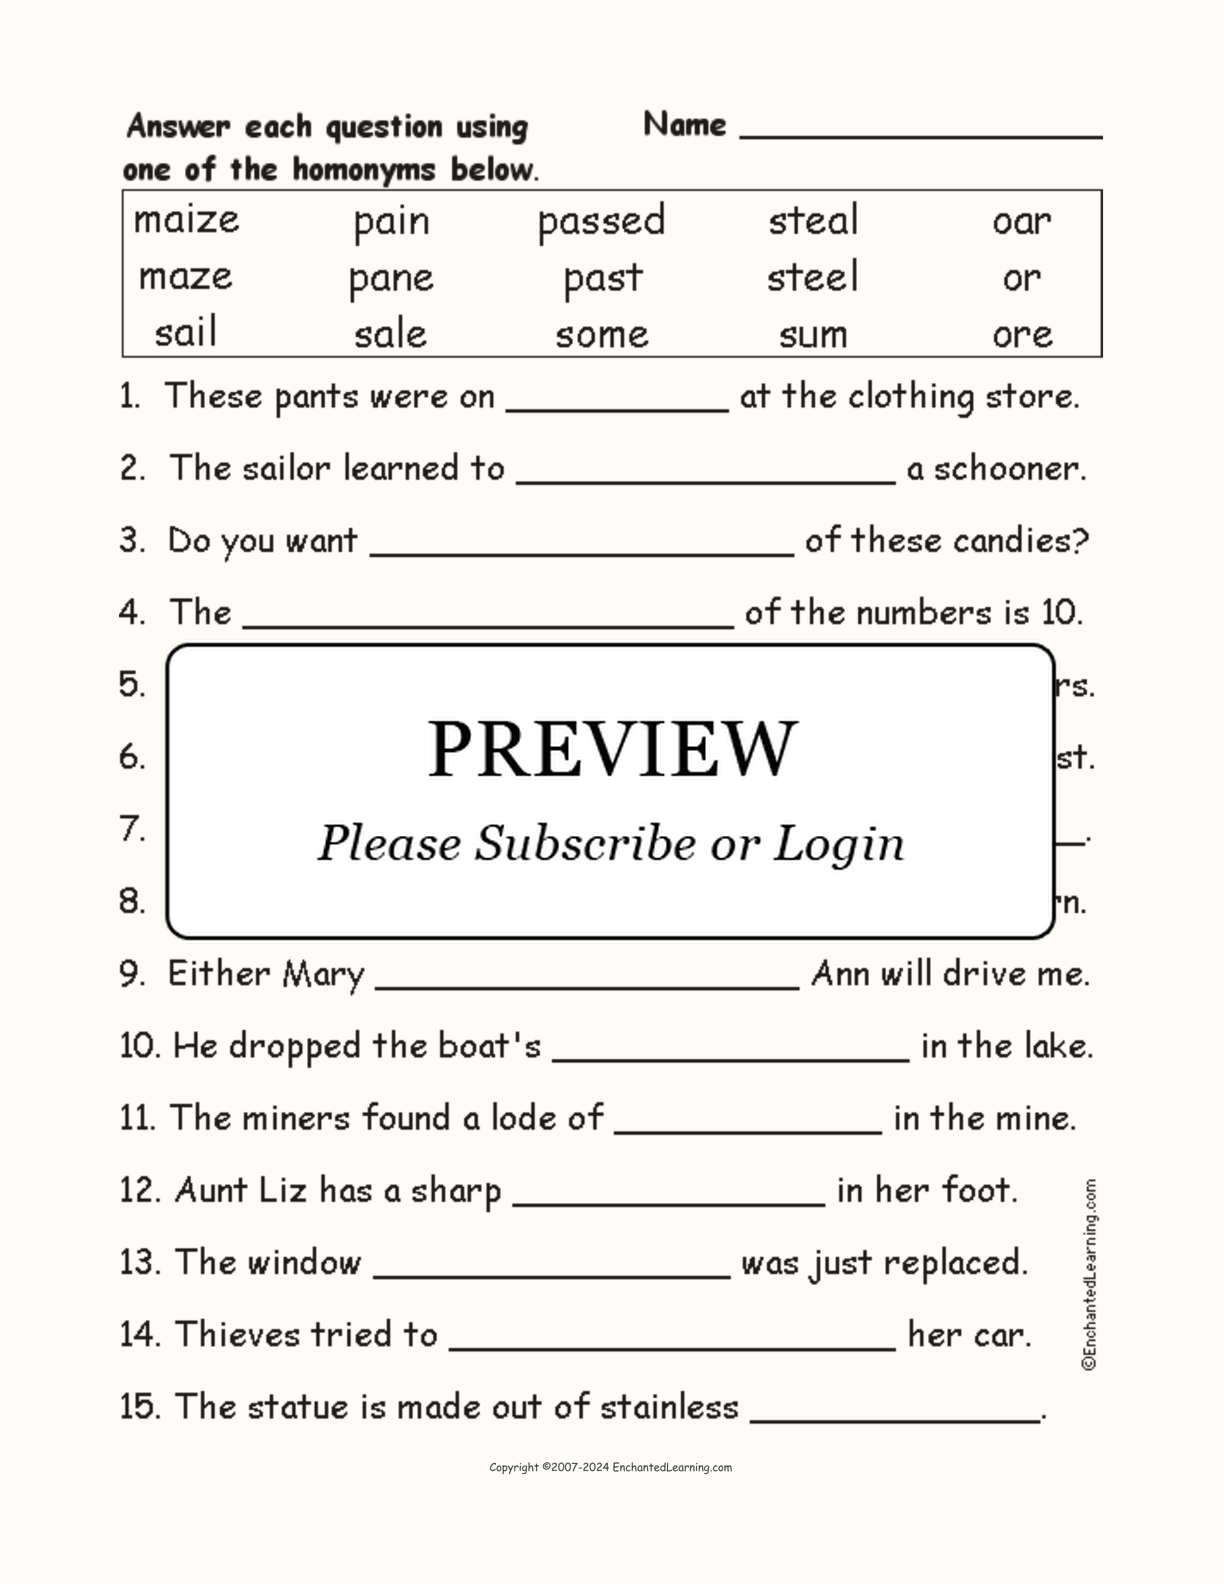 Homonyms Spelling Word Questions #5 interactive worksheet page 1